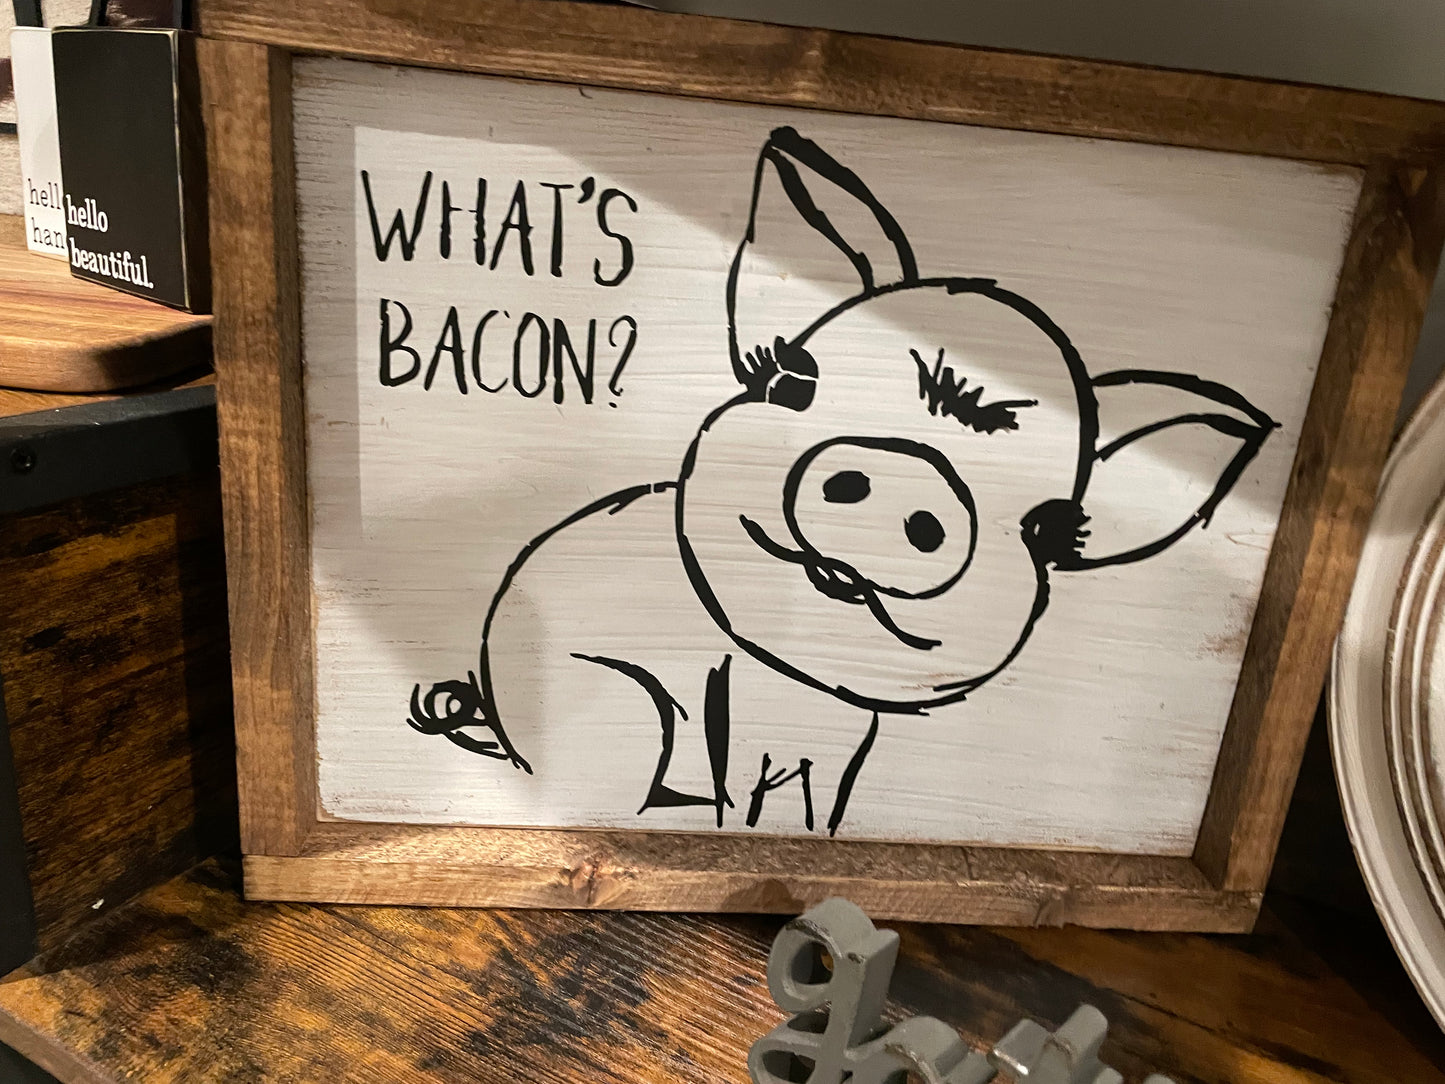 What's bacon